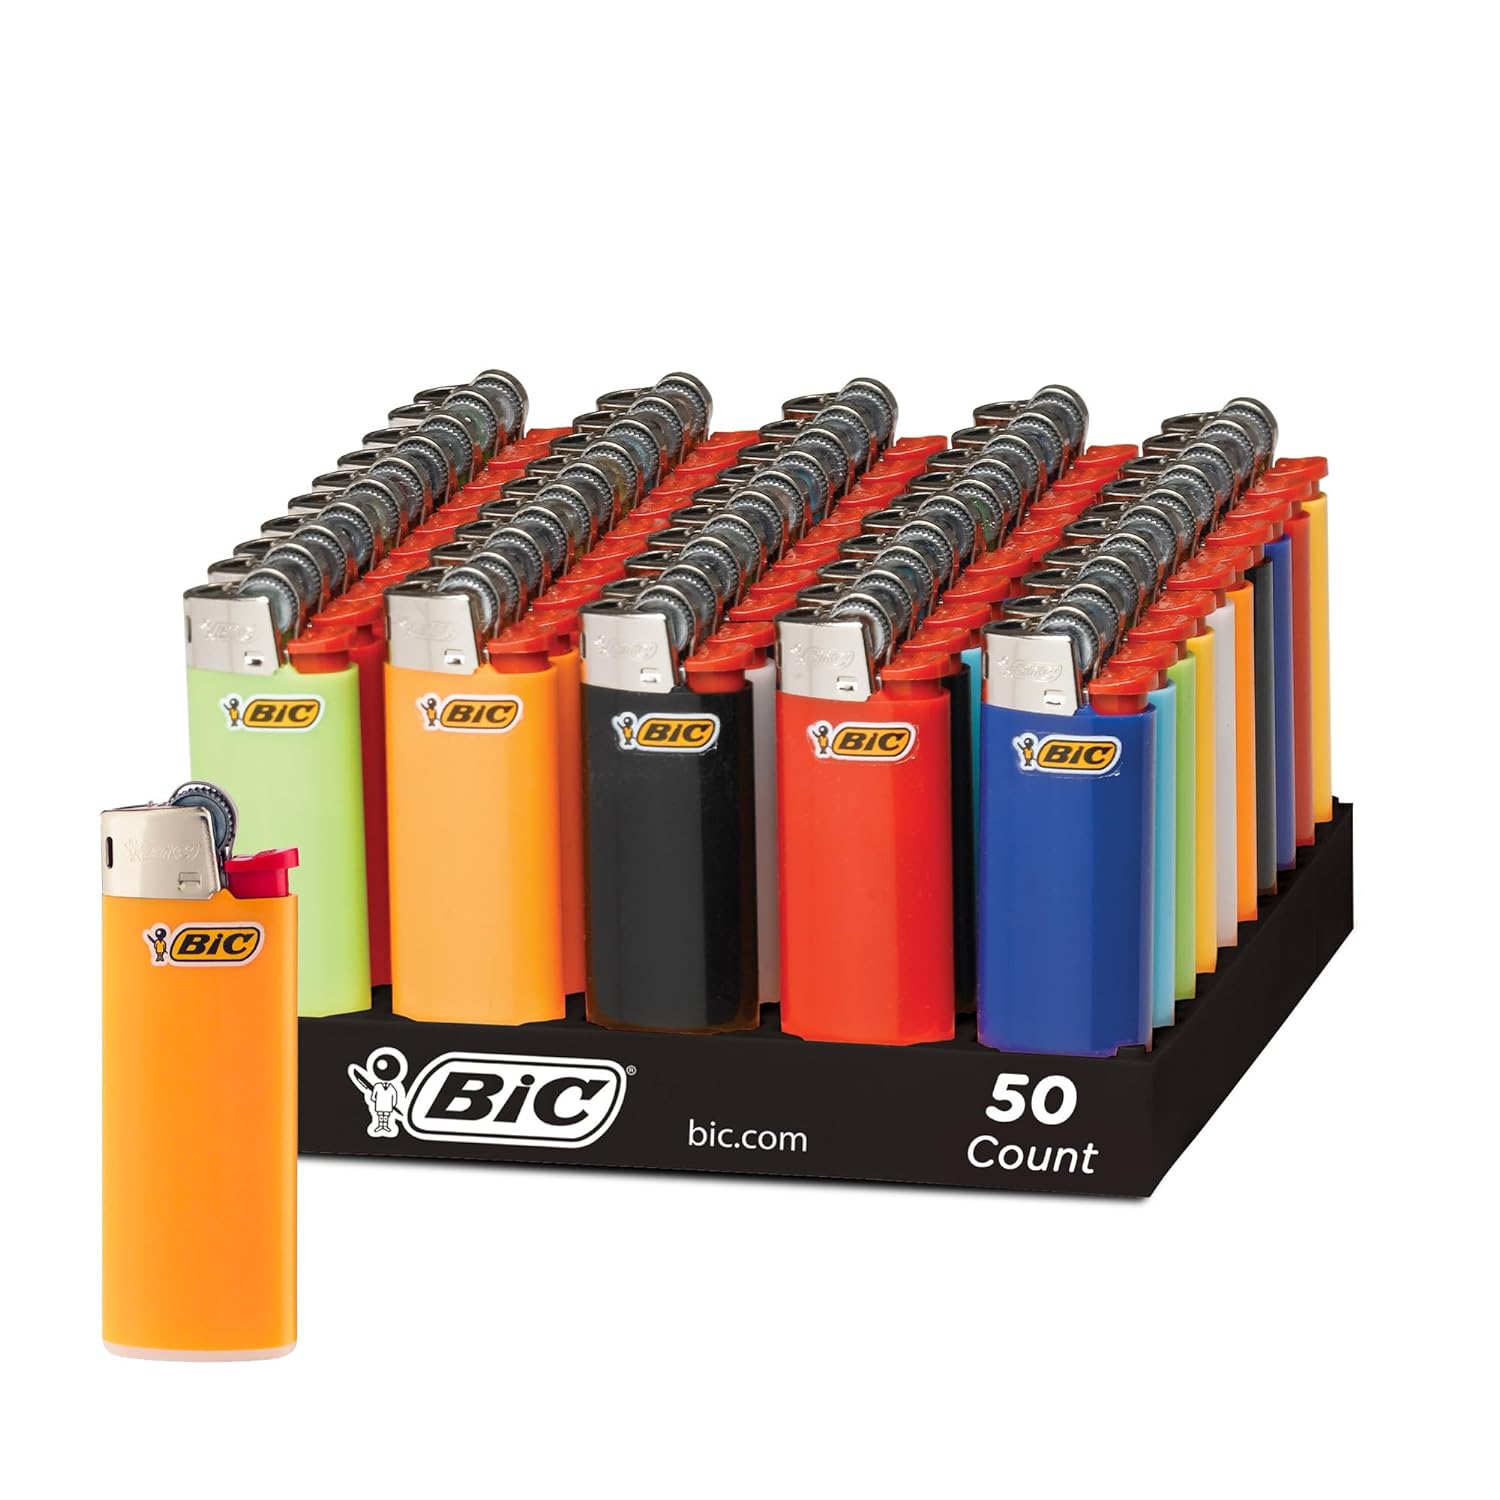 BIC Mini J5 Pocket Lighters in India, Wholesale tray of 50 lighters